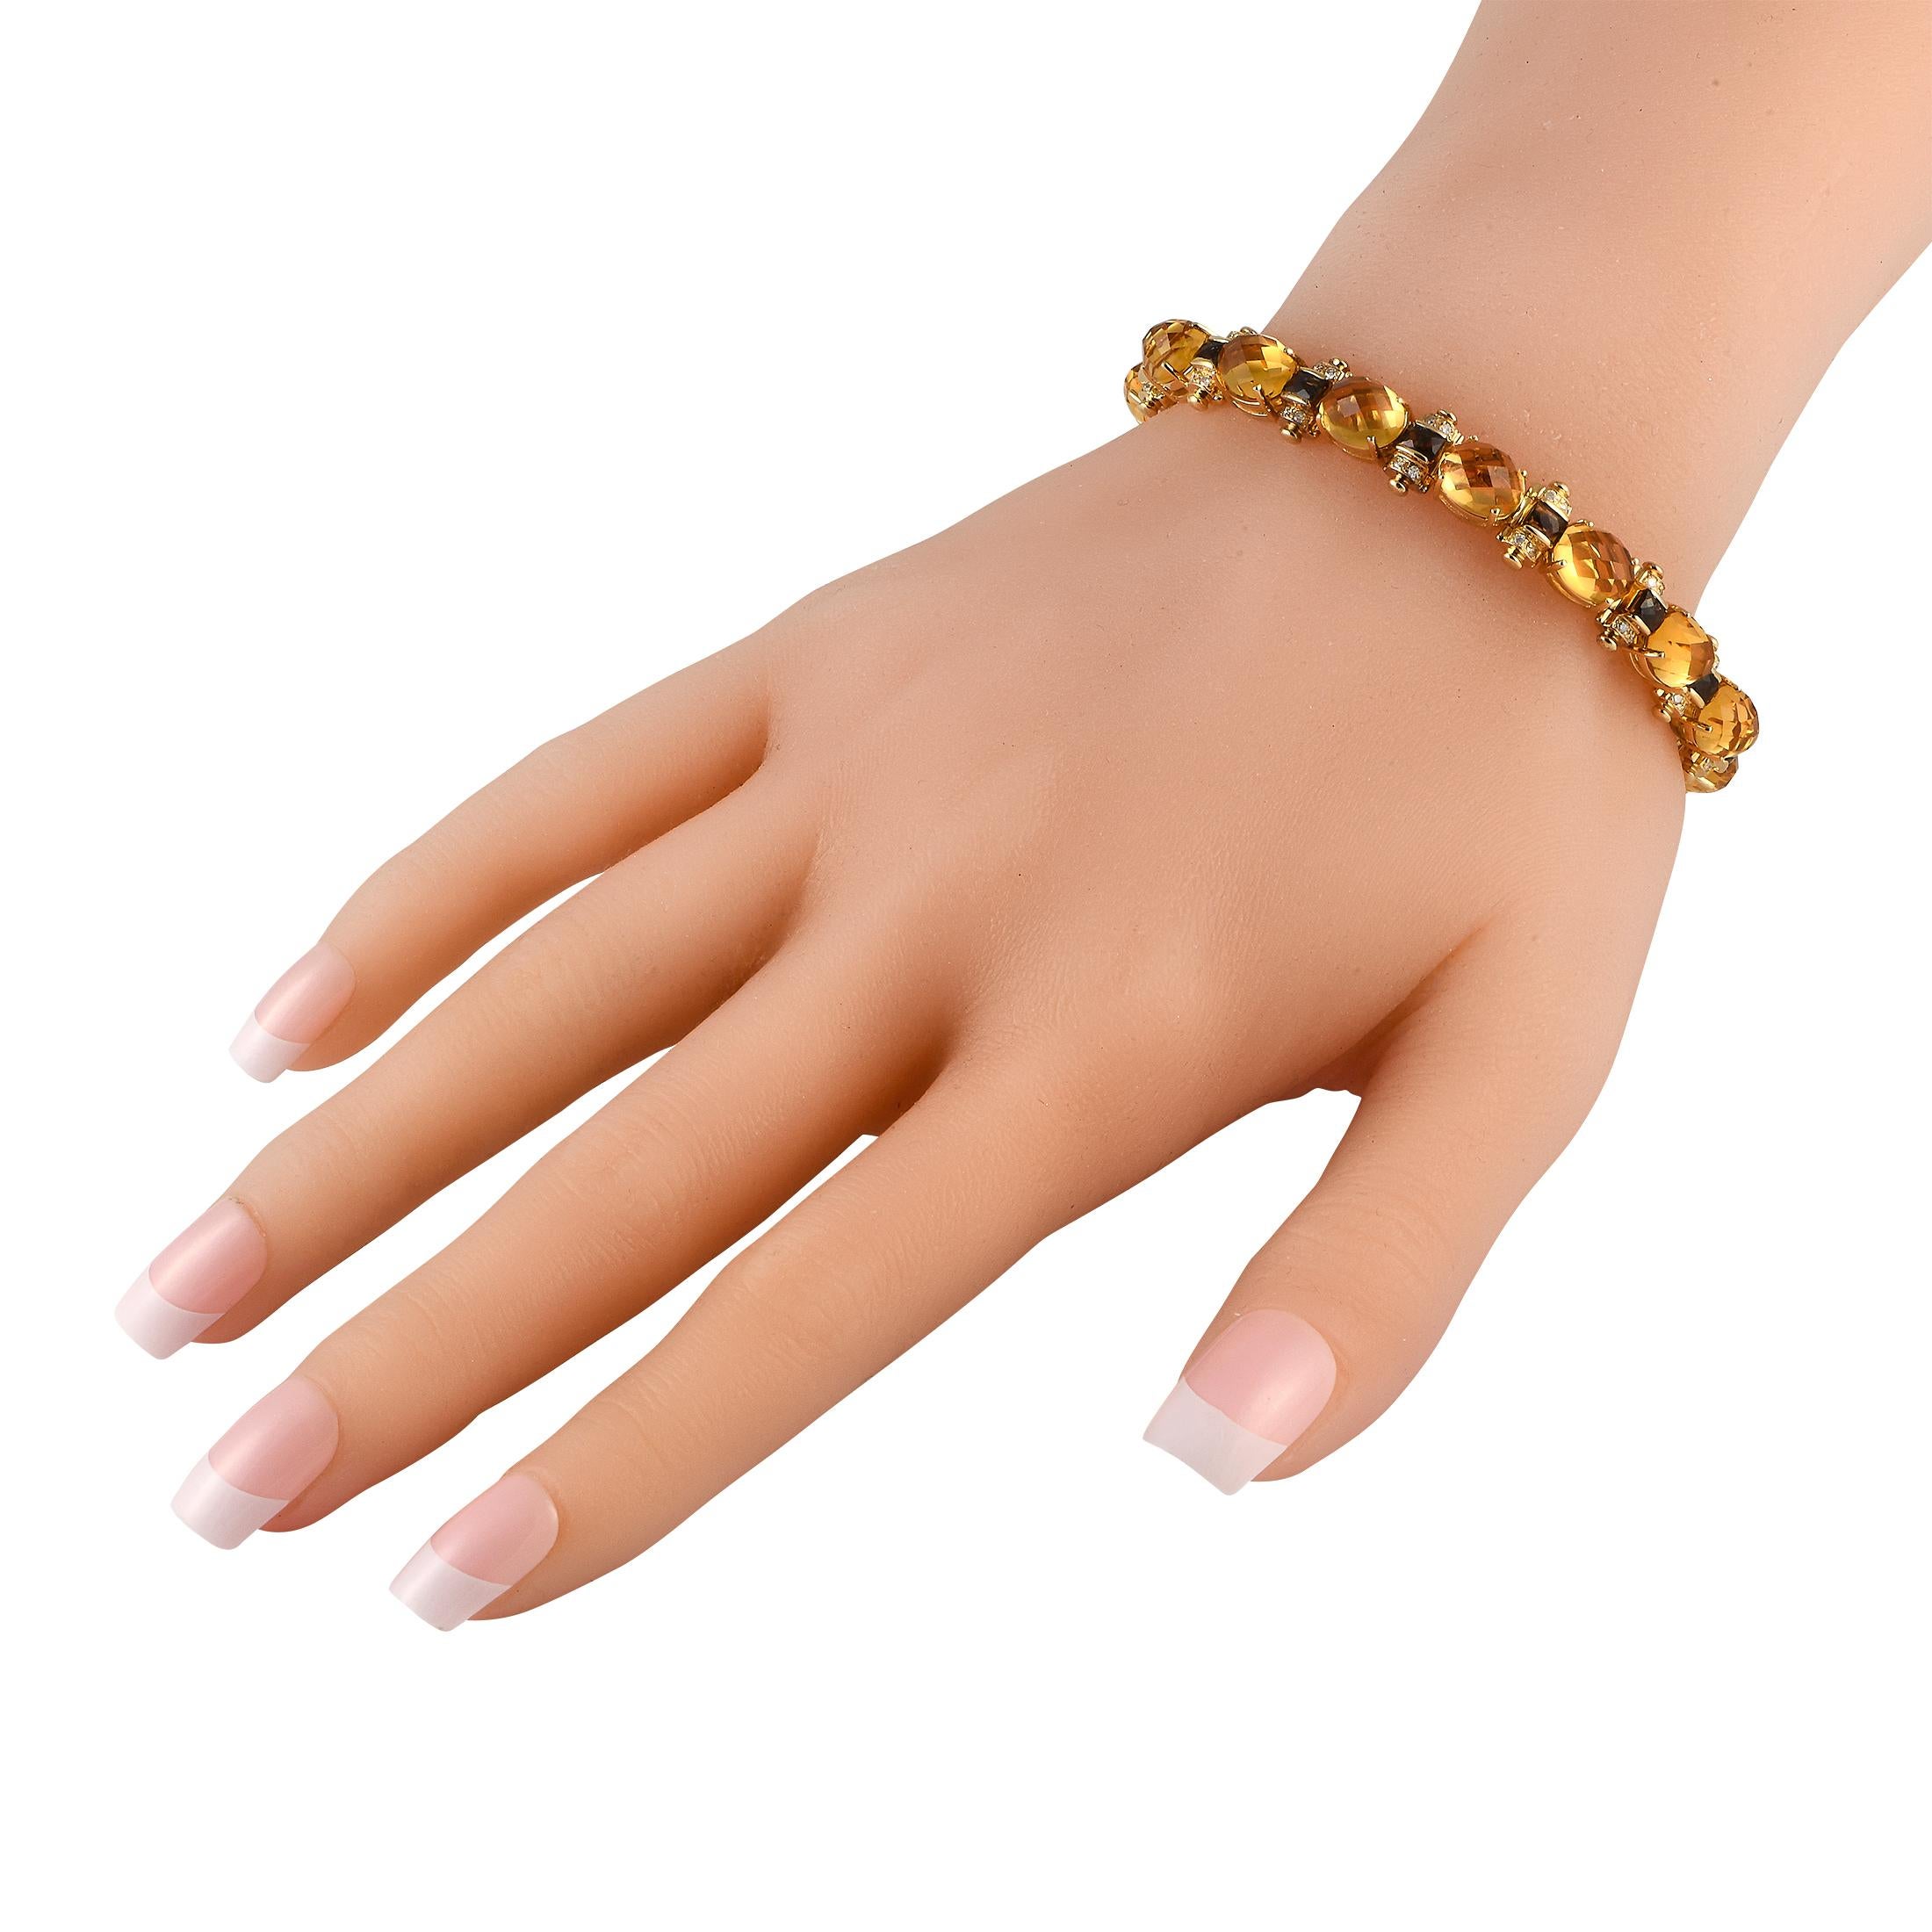 Brimming with retro charm, this LB Exclusive bracelet will bring a fabulous twist to any ensemble. Fashioned in 14K yellow gold, the bracelet features an alternating pattern of oval-shaped yellow topaz gemstones and diamond-studded, brown